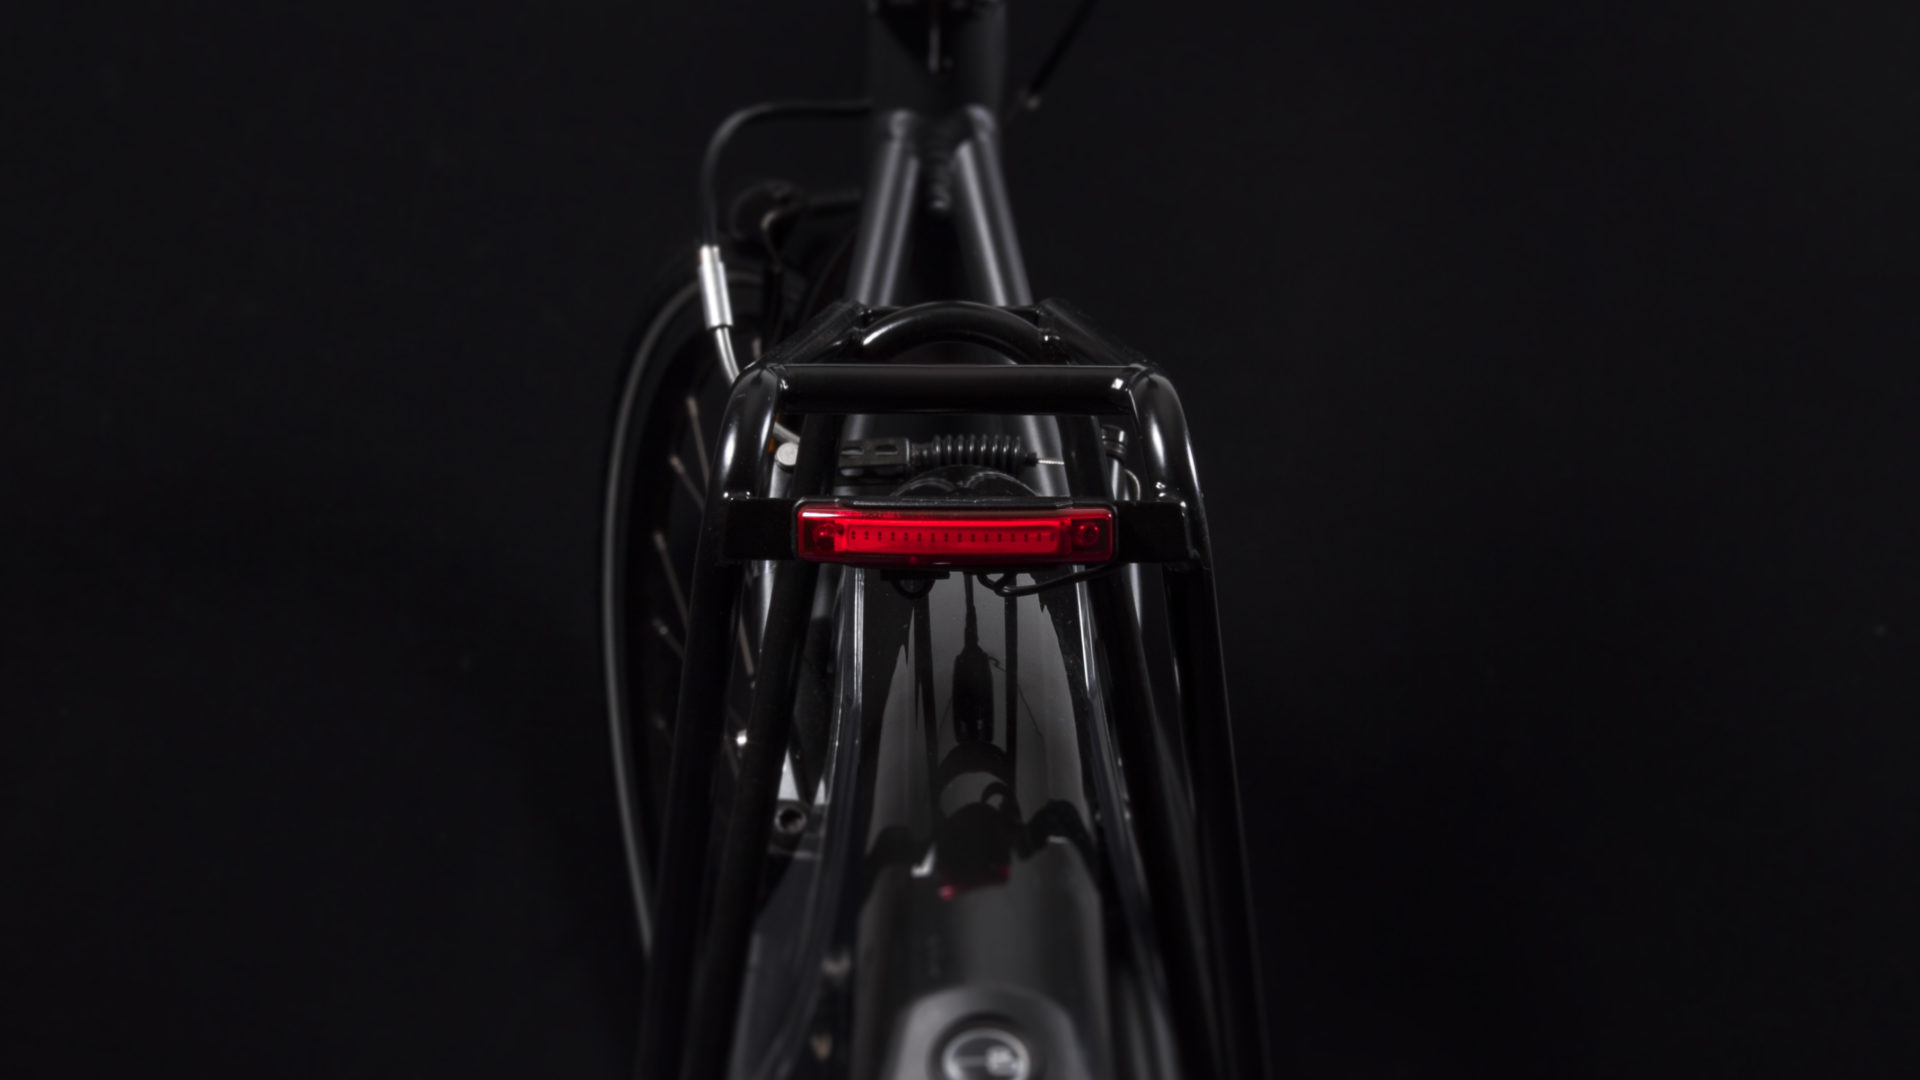 Pimento Speed rearlight for speed e-bike on bike with light and brake light off